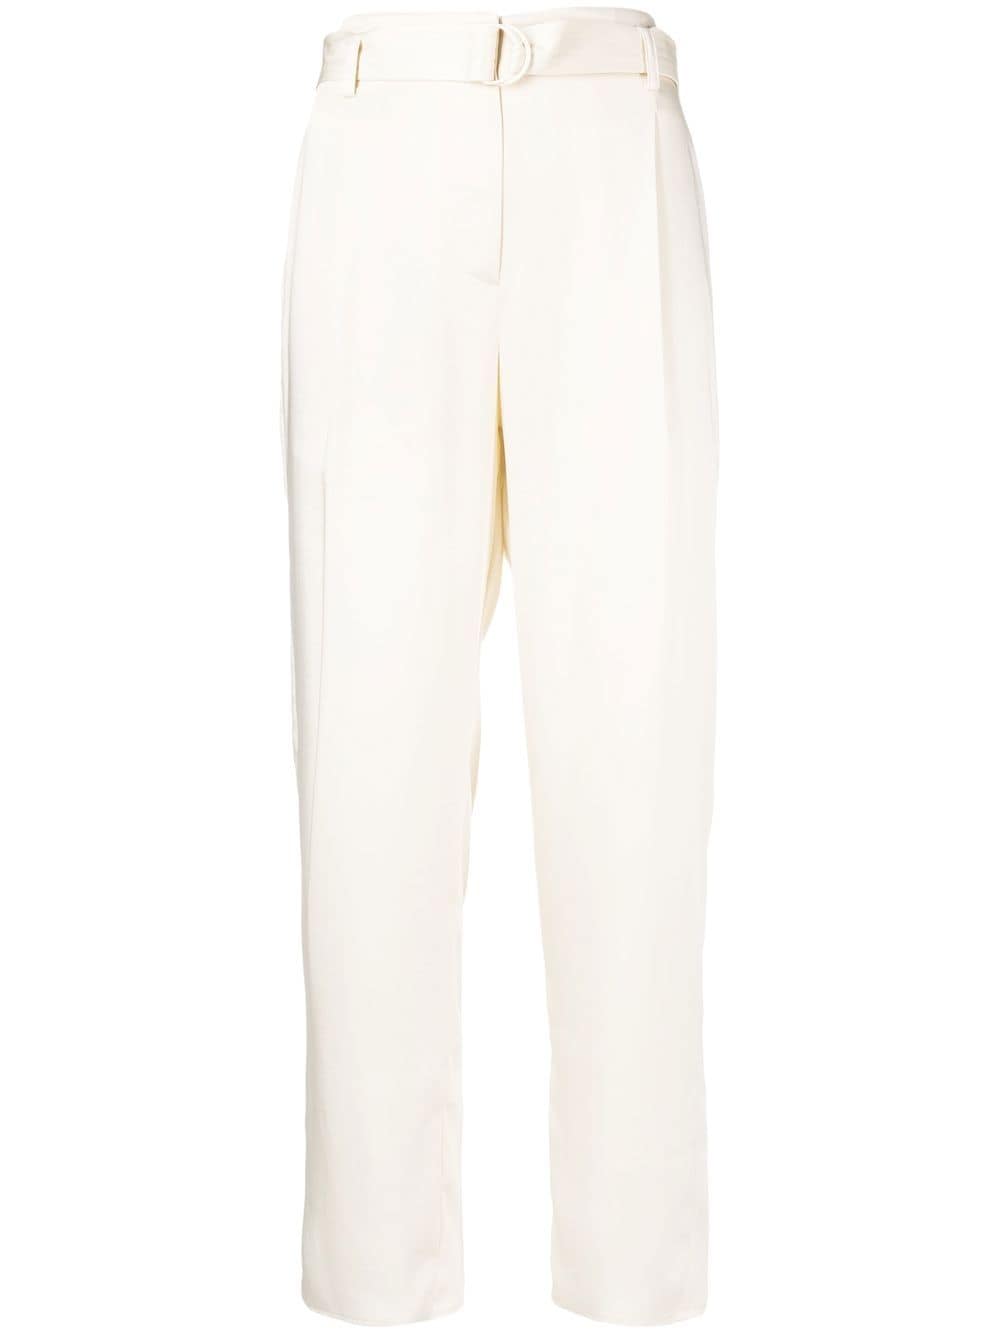 LAPOINTE Belted Cropped Trousers - Farfetch